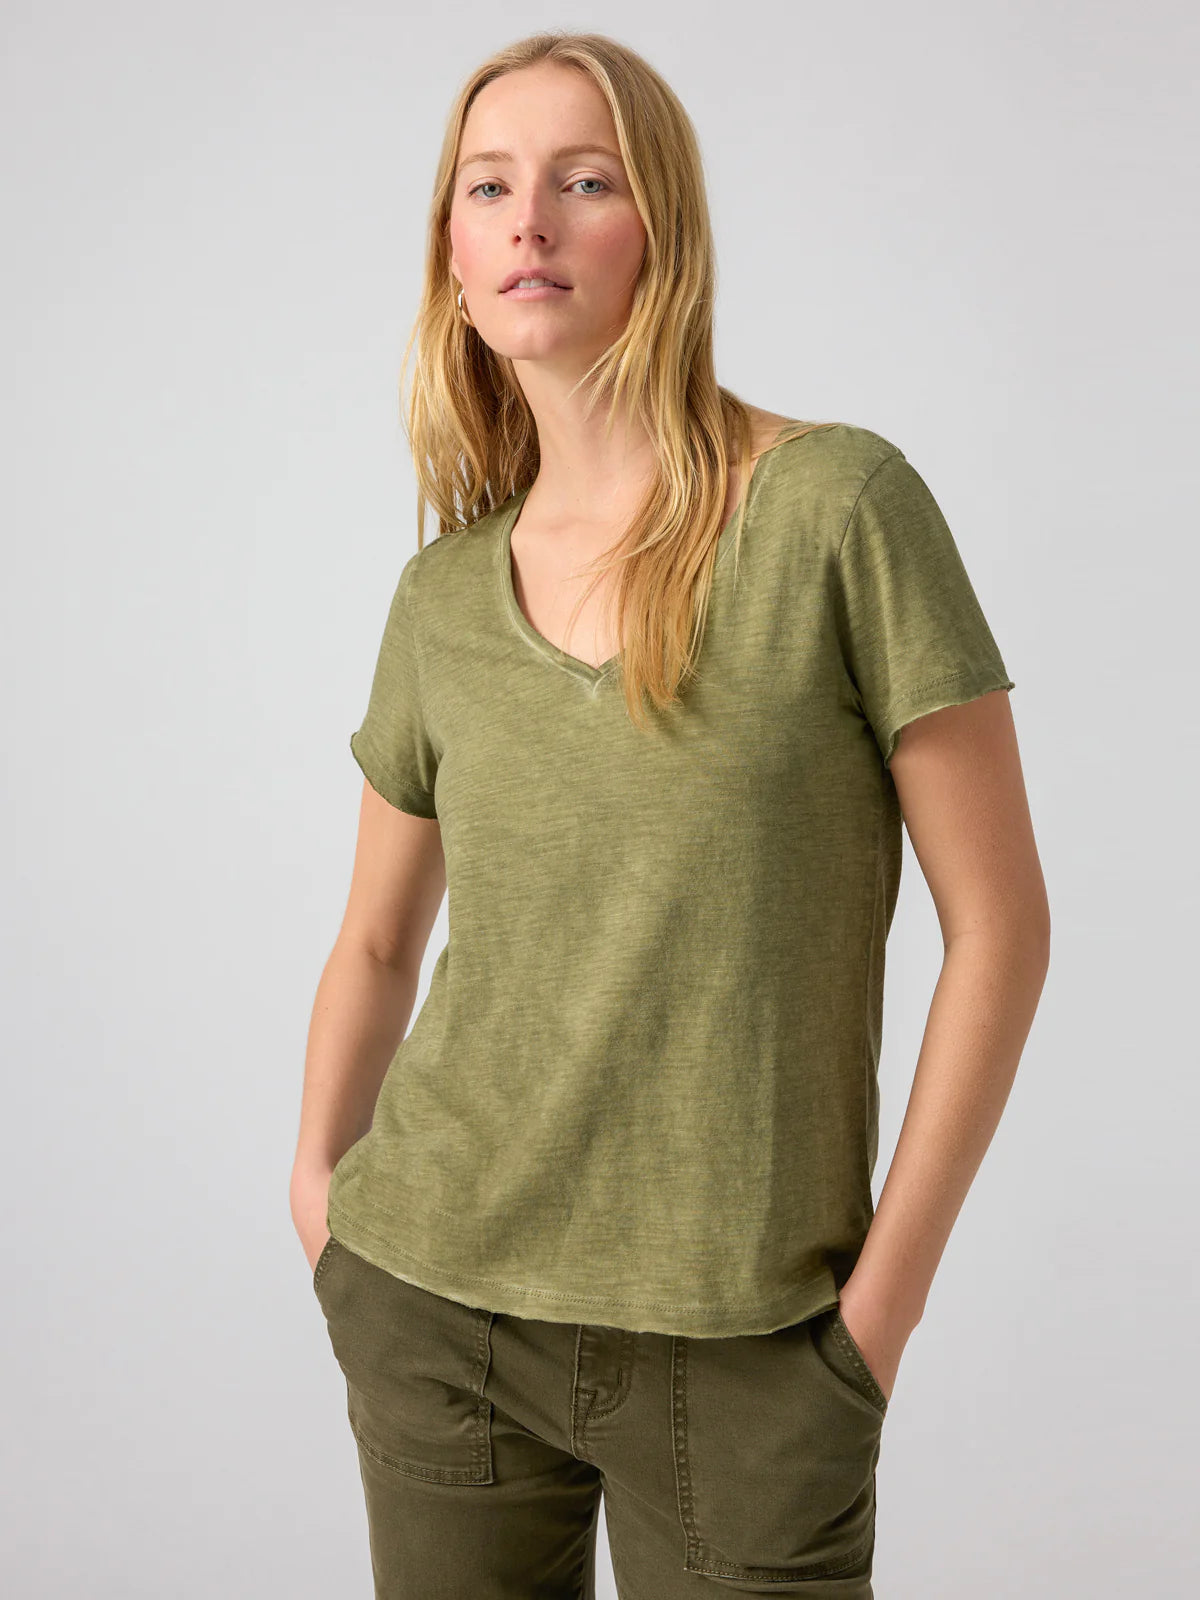 Sanctuary Carefree Tee in Burnt Olive